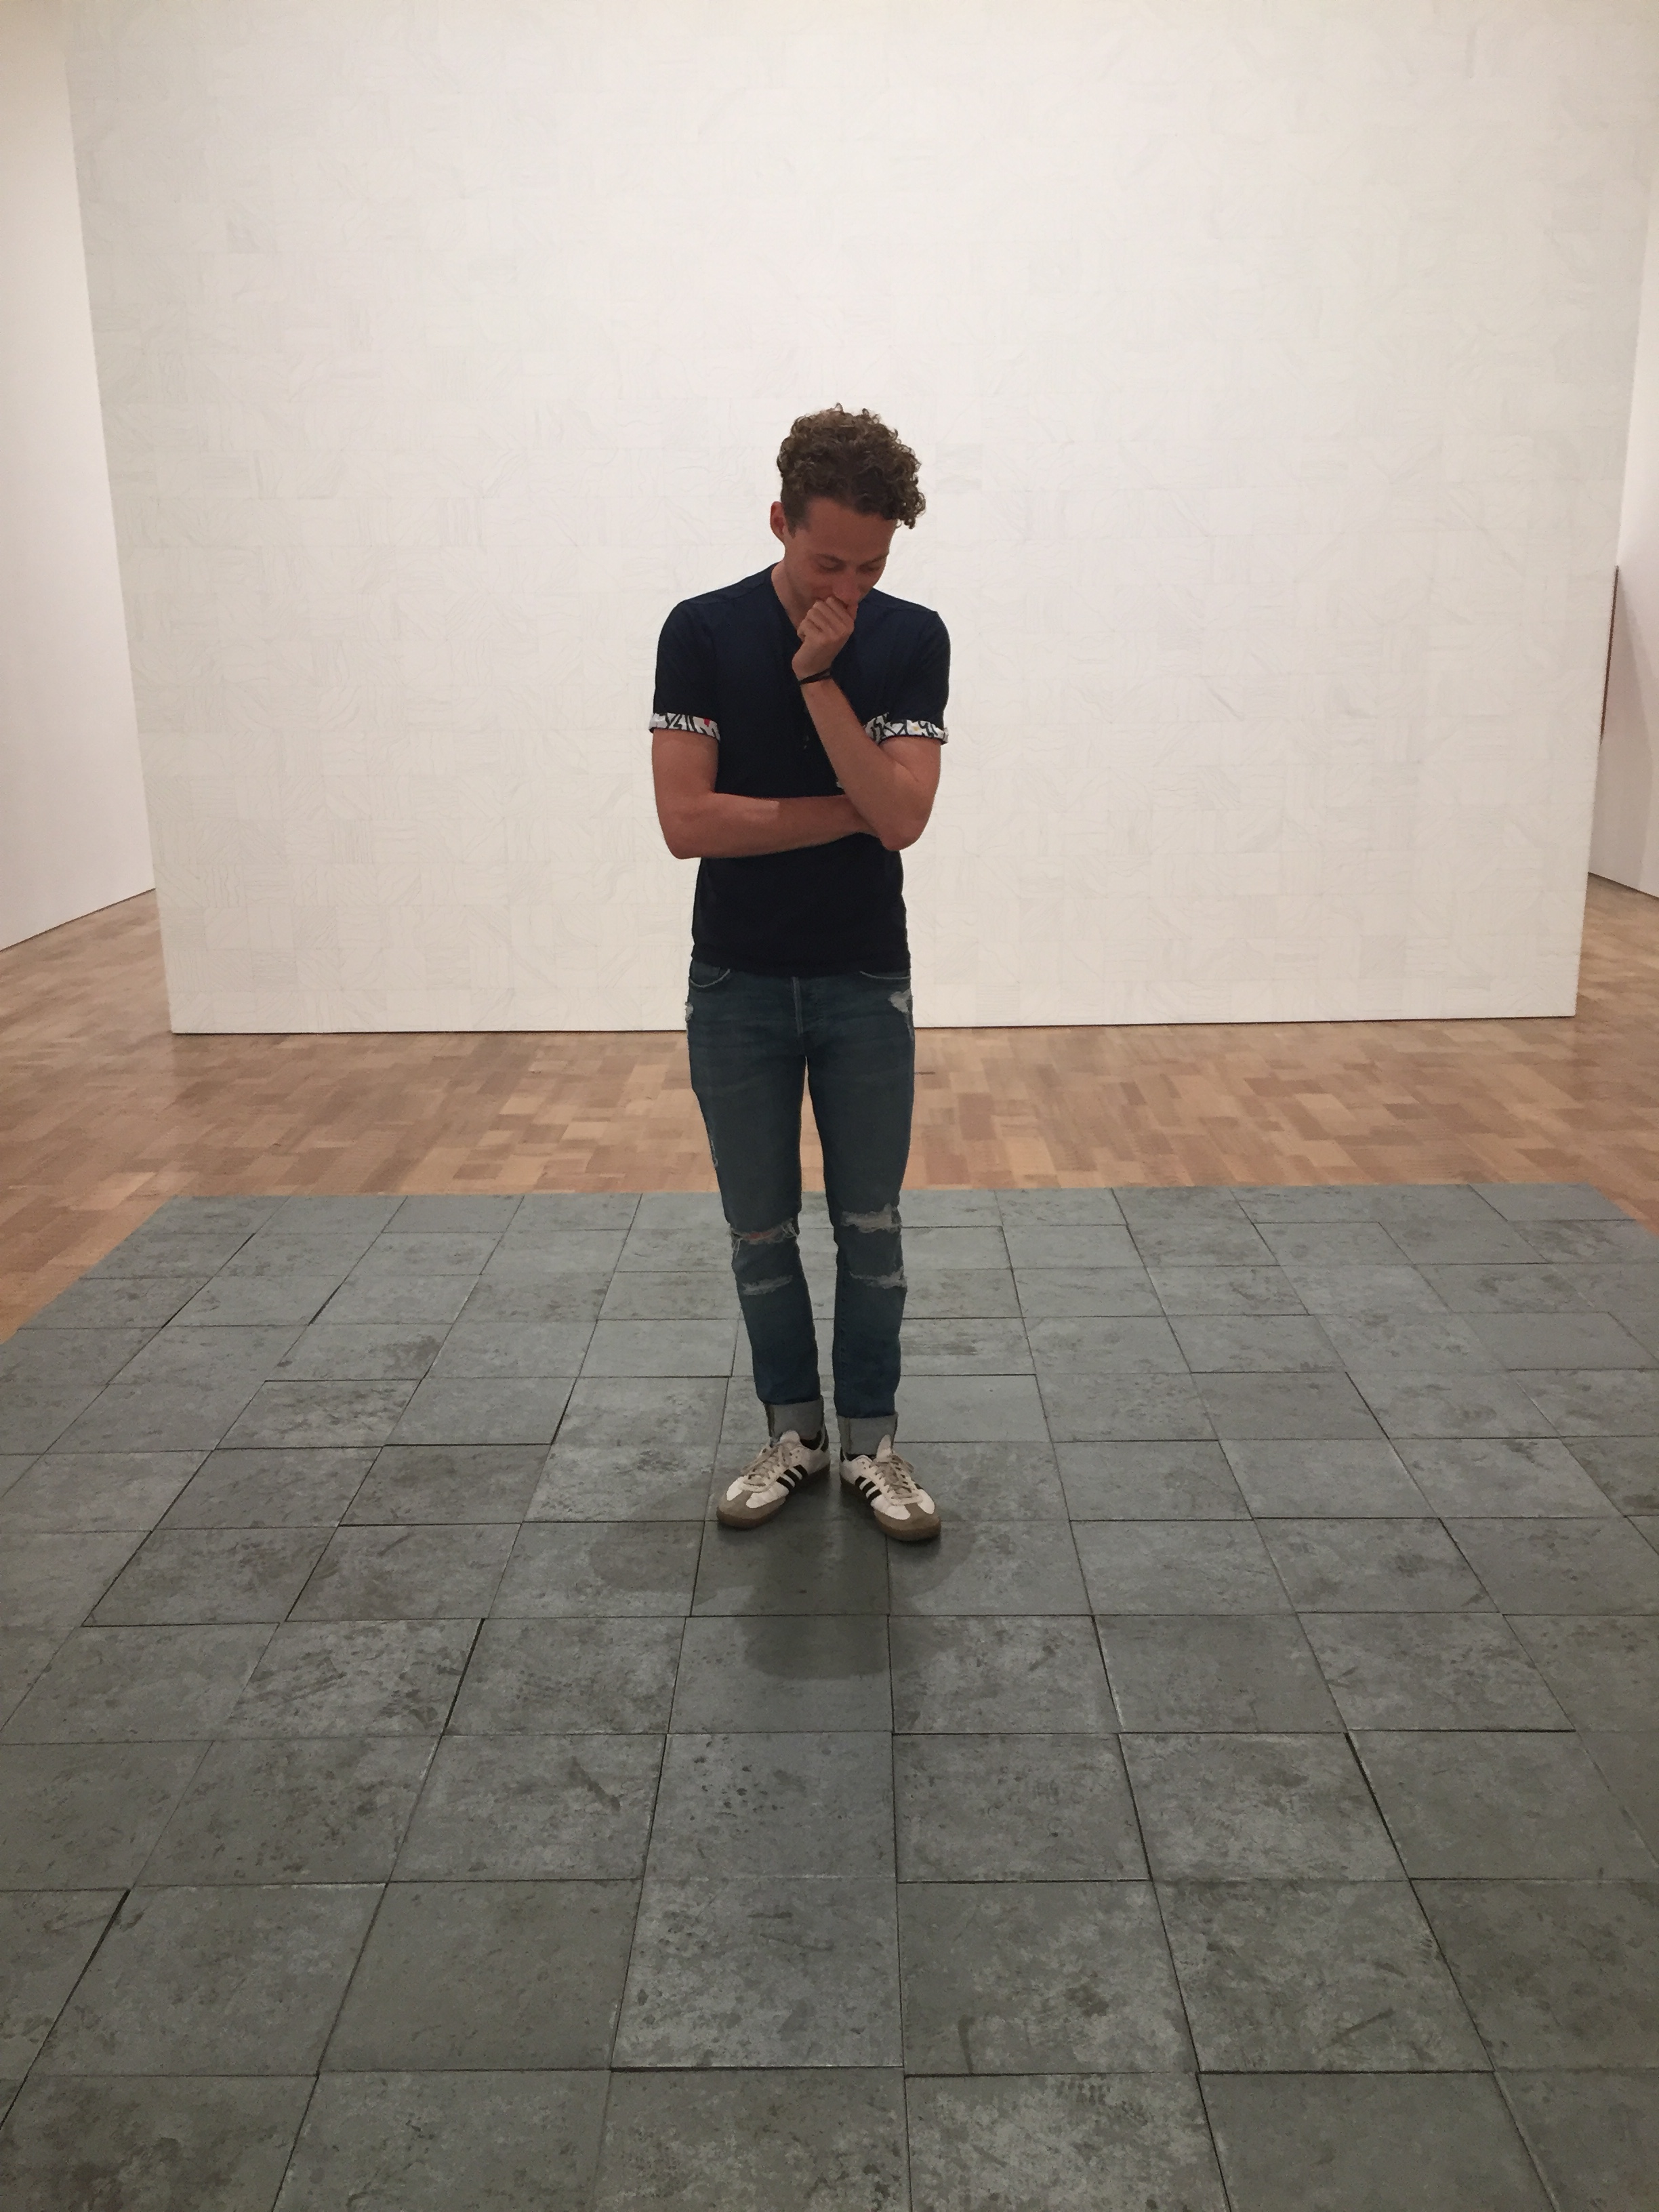 Student Michael Basiewicz visiting the Art Institute of Chicago